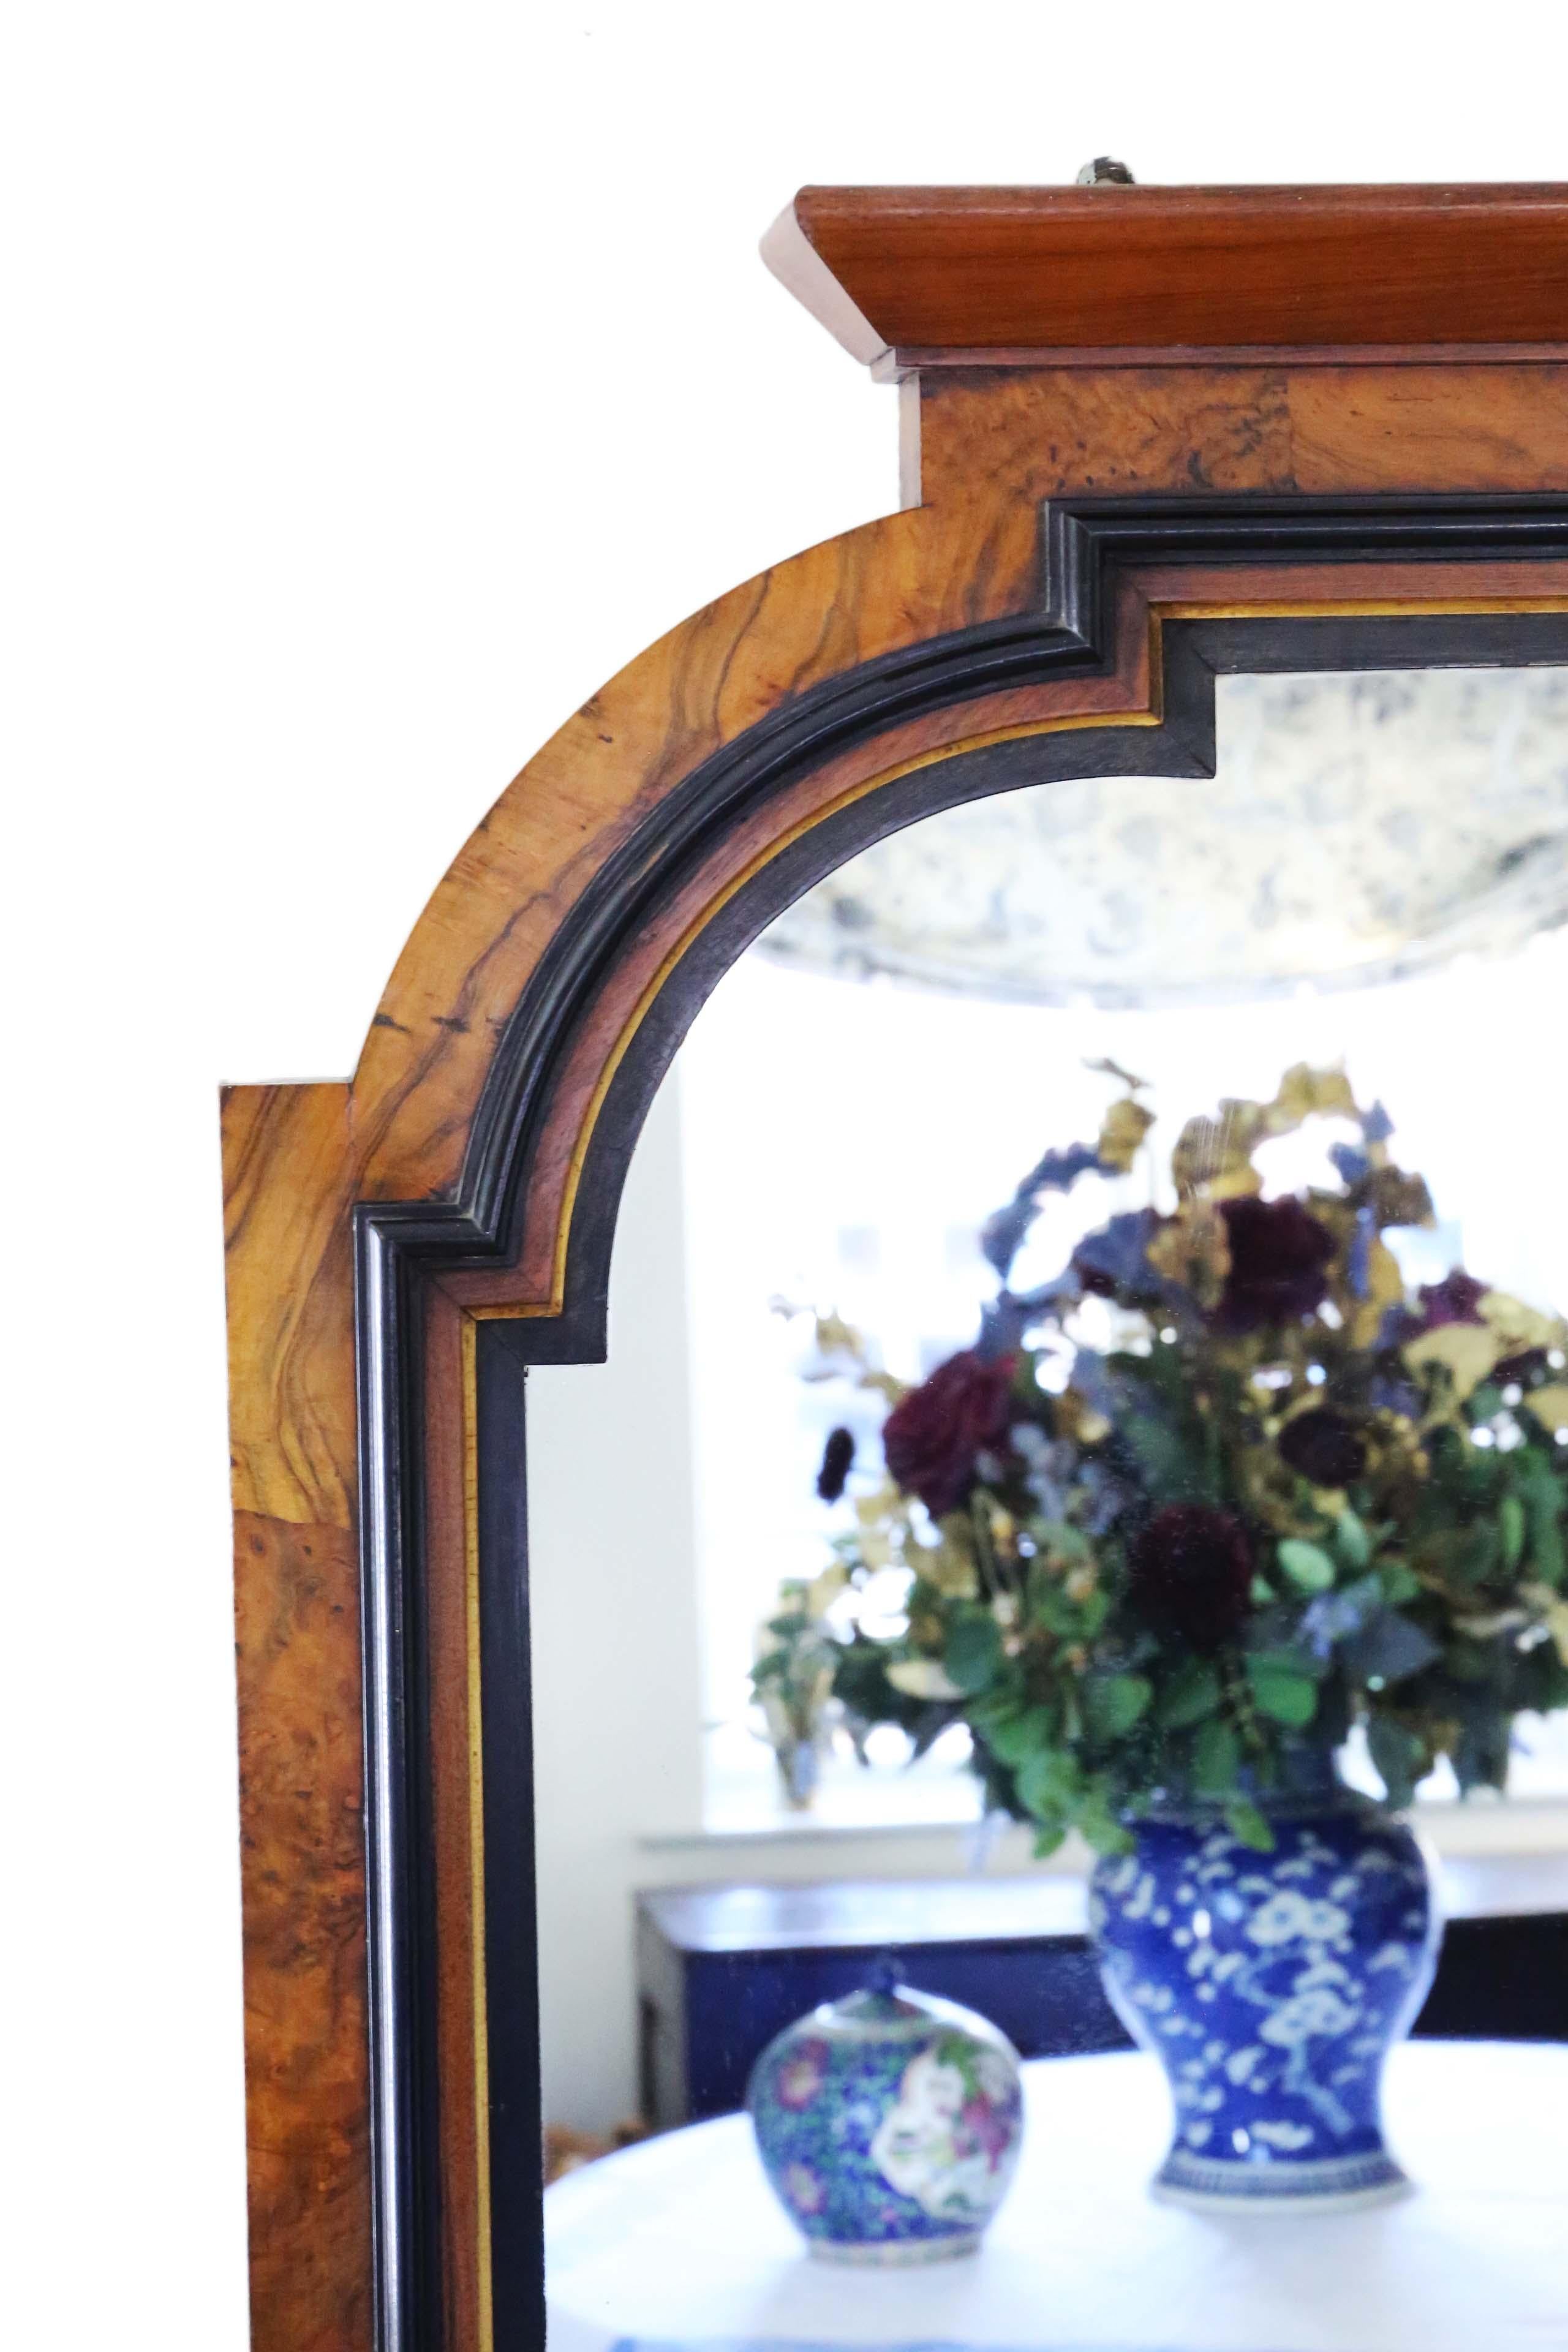 Antique very large fine quality burr walnut and ebonised floor, wall or overmantle mirror C1880, Aesthetic movement. A very large rare breathtaking statement piece.

An impressive and very rare find, that would look amazing in the right location.